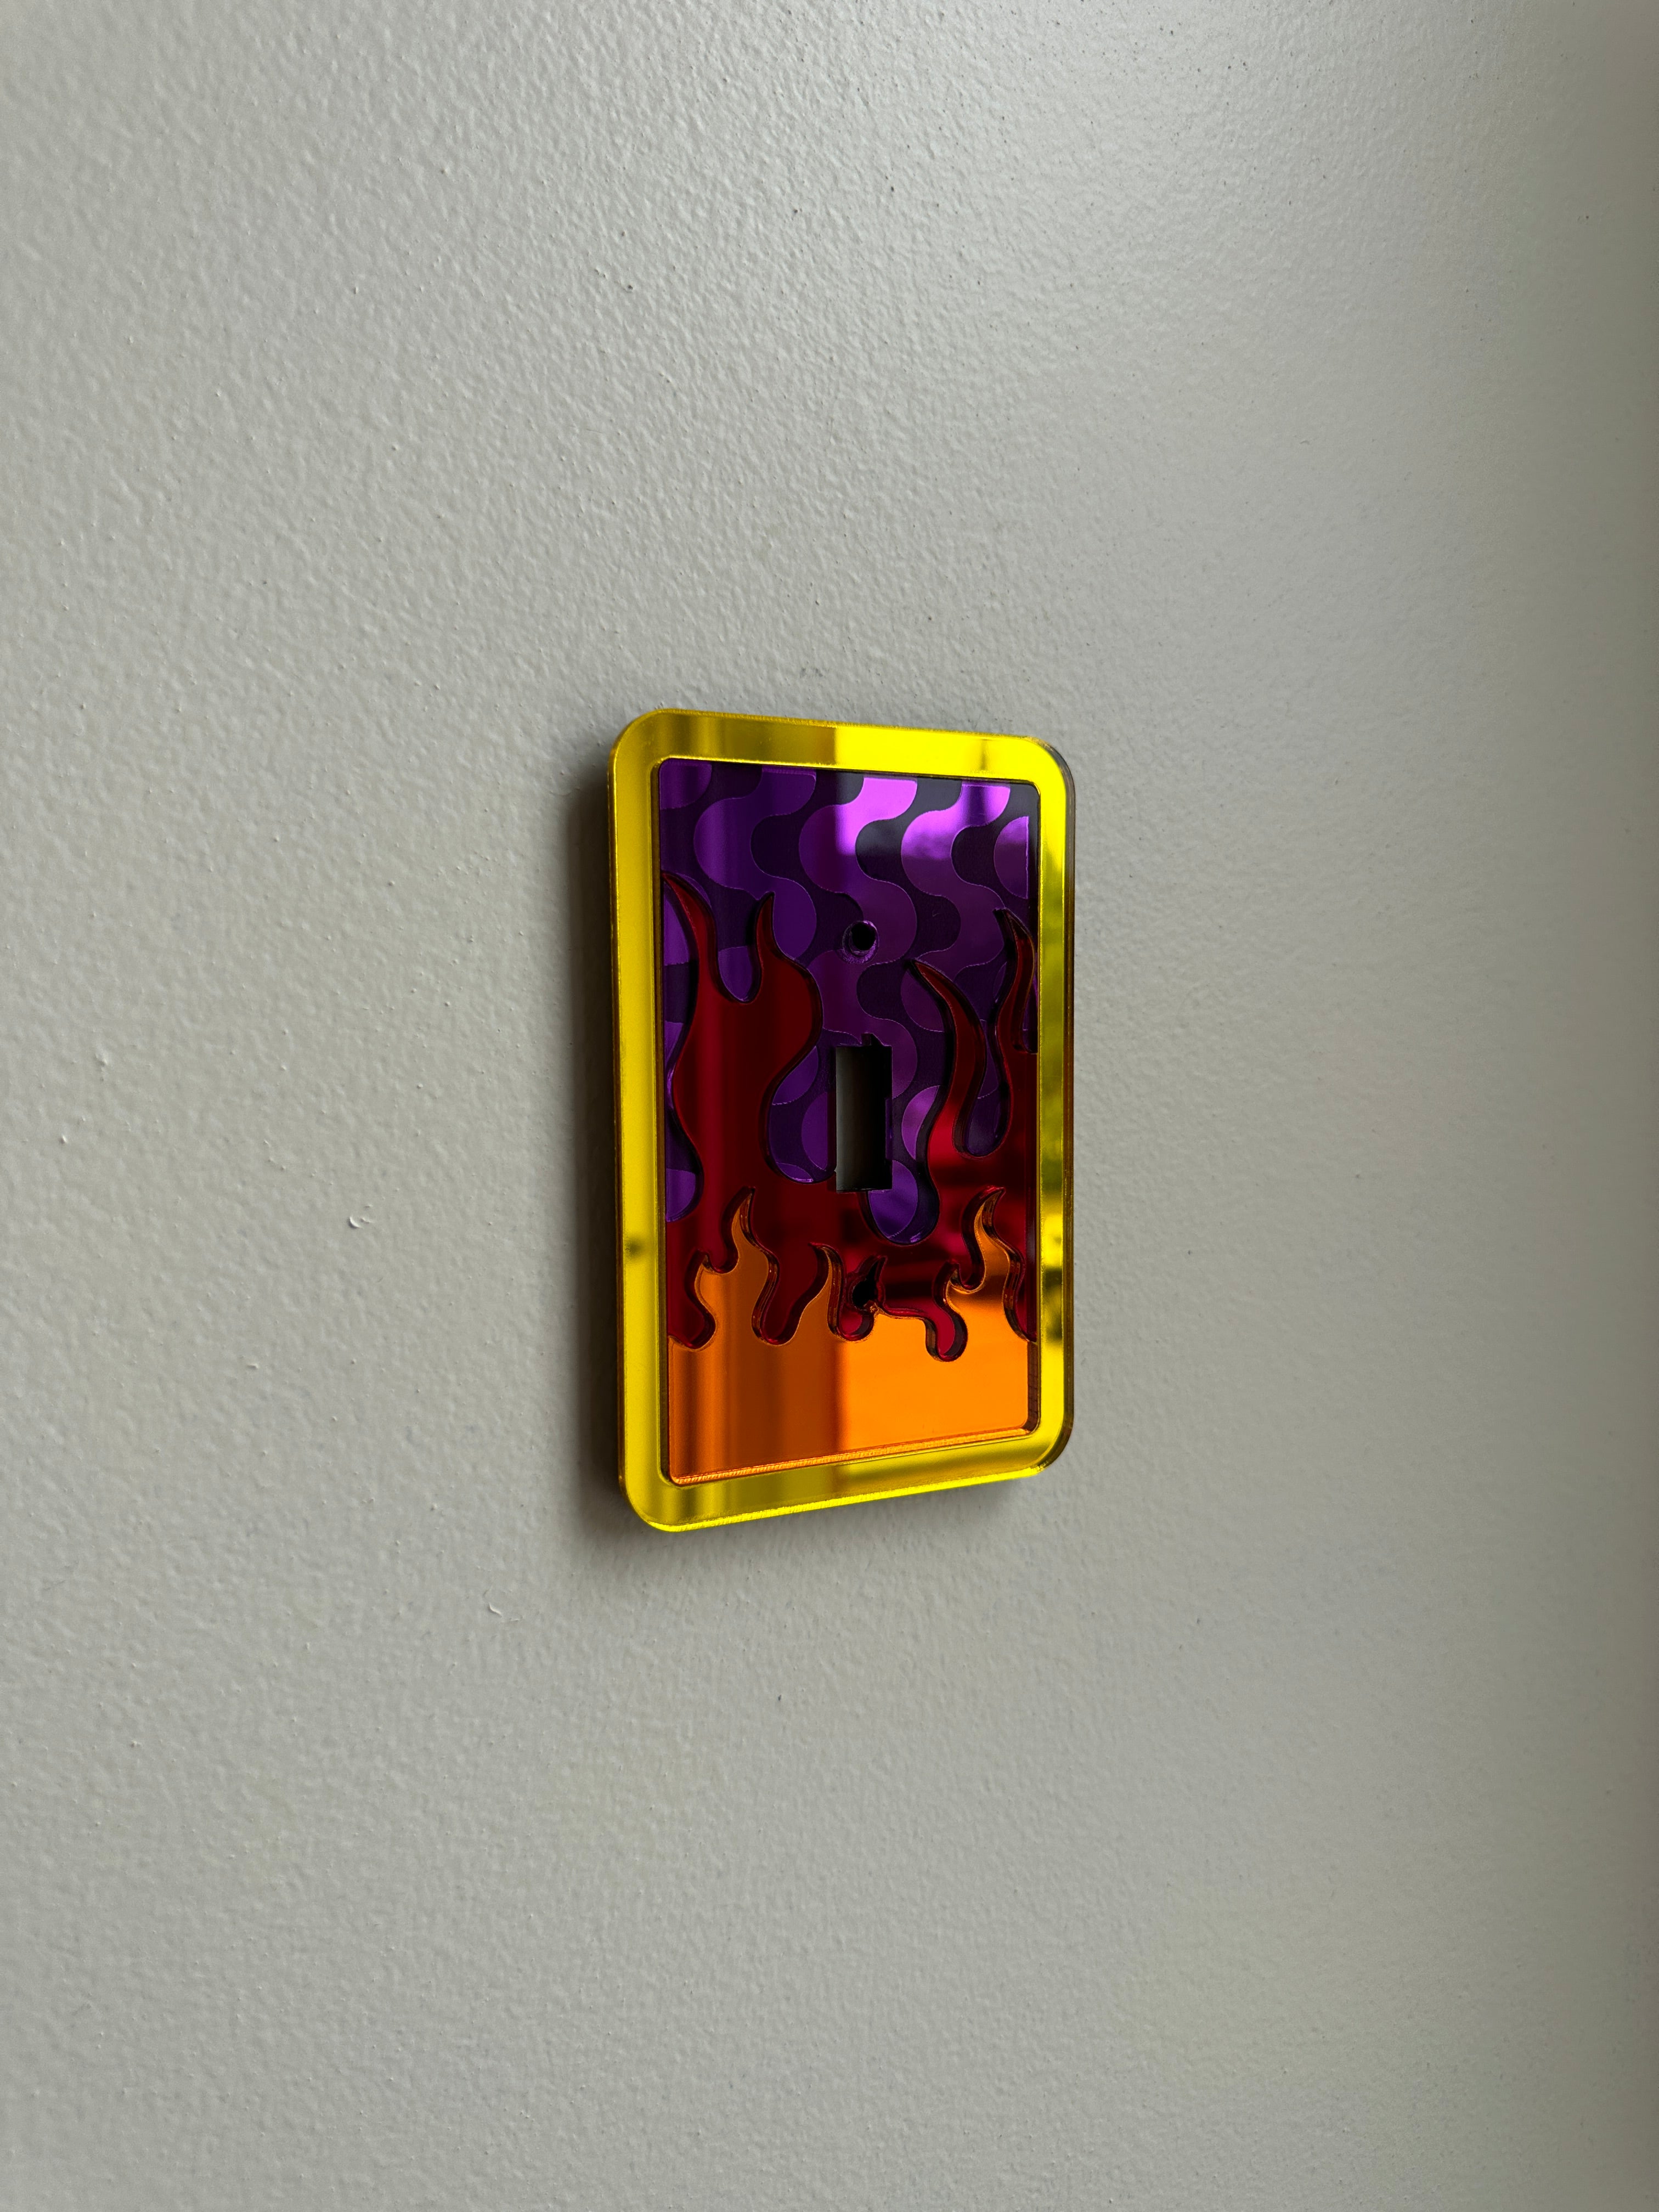 Mirror Flaming Light Switch Sample Sale